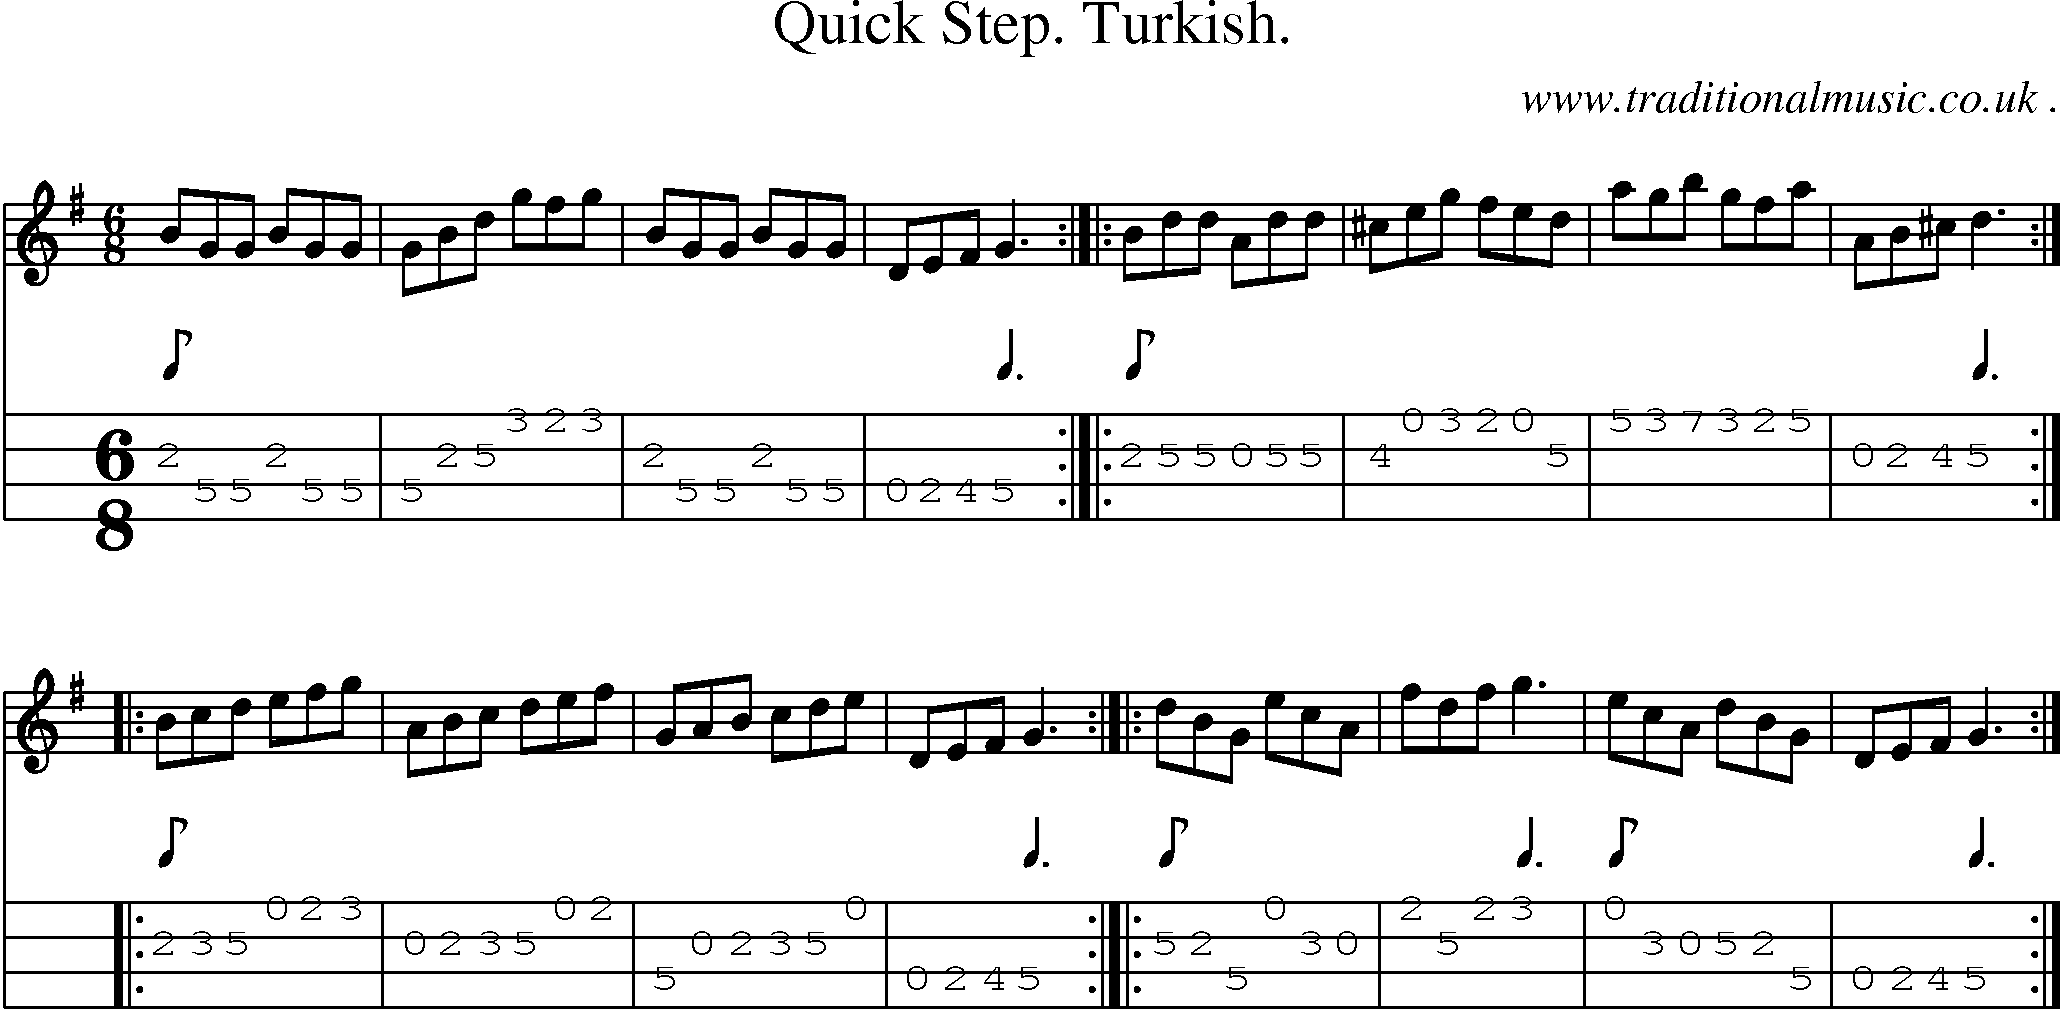 Sheet-music  score, Chords and Mandolin Tabs for Quick Step Turkish